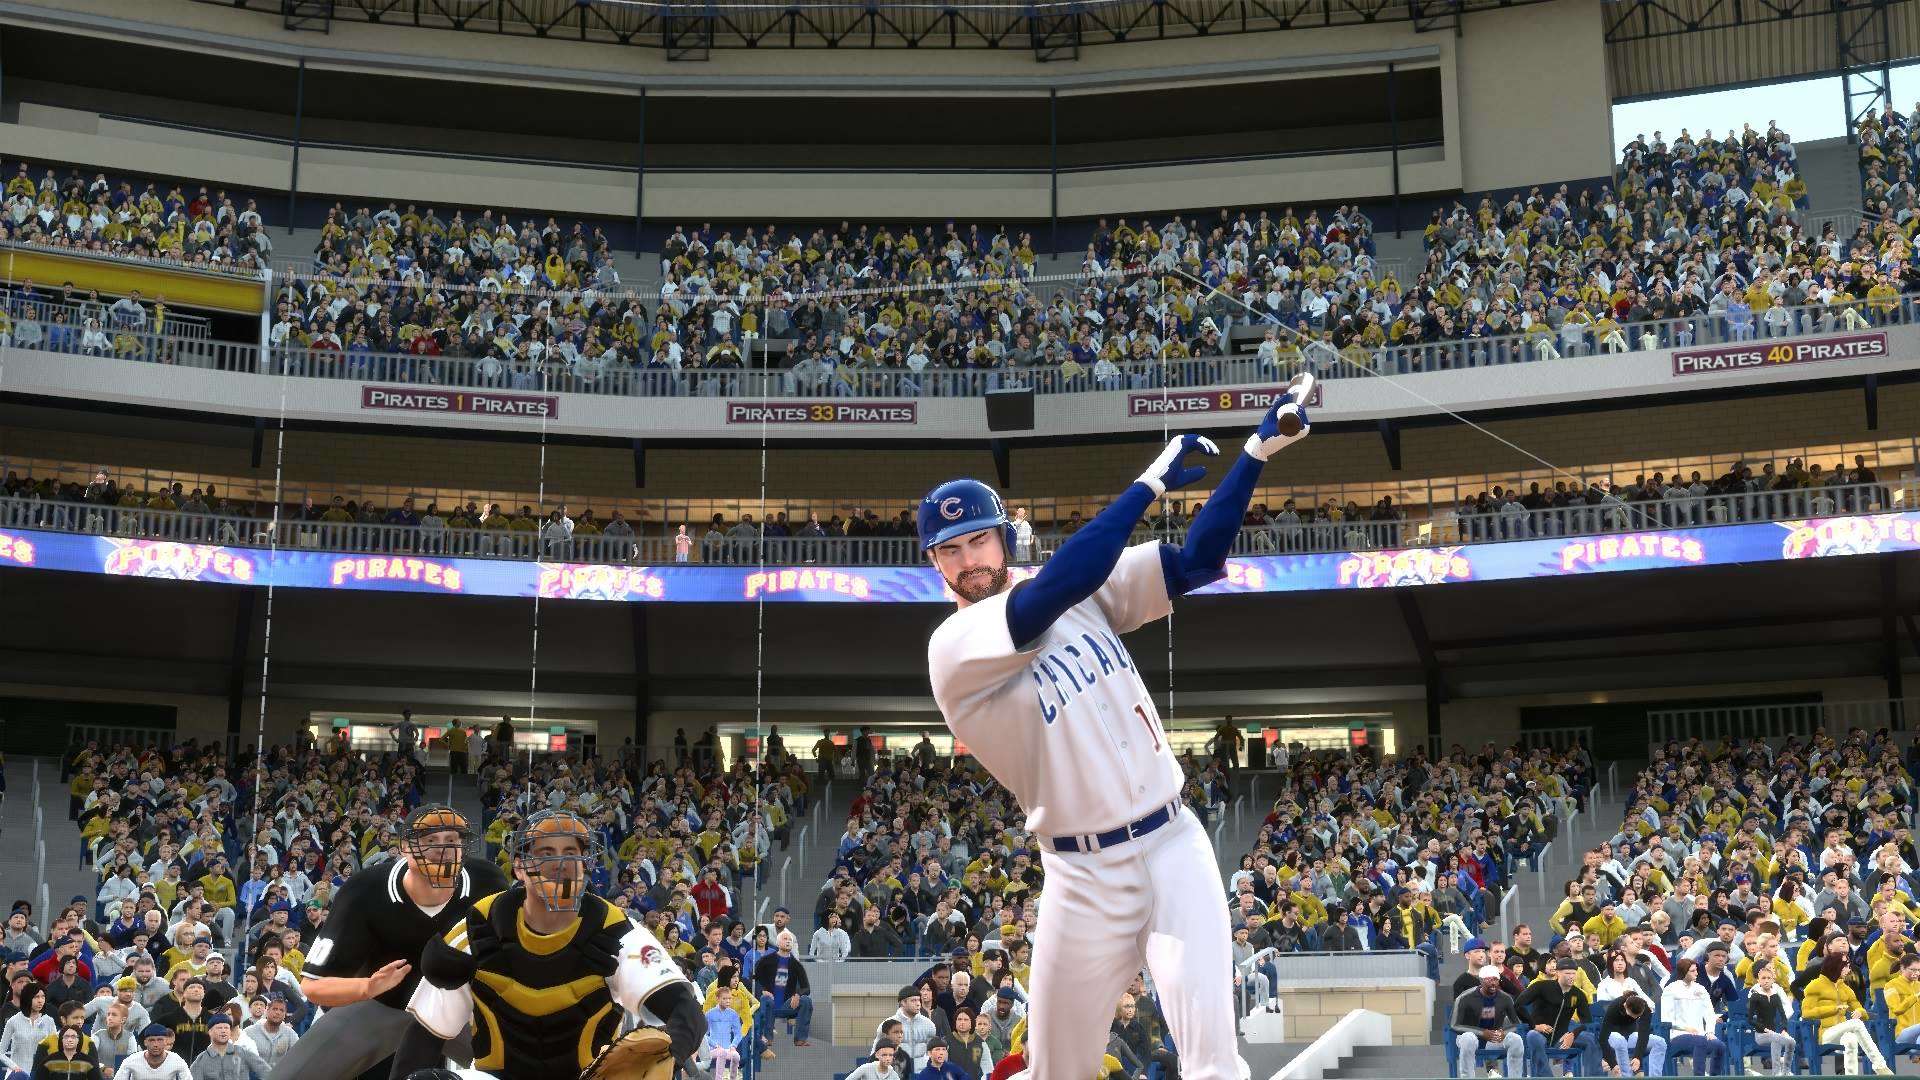 Mlb 15 The Show Roster Update Two - Kris Bryant The Show 18 , HD Wallpaper & Backgrounds